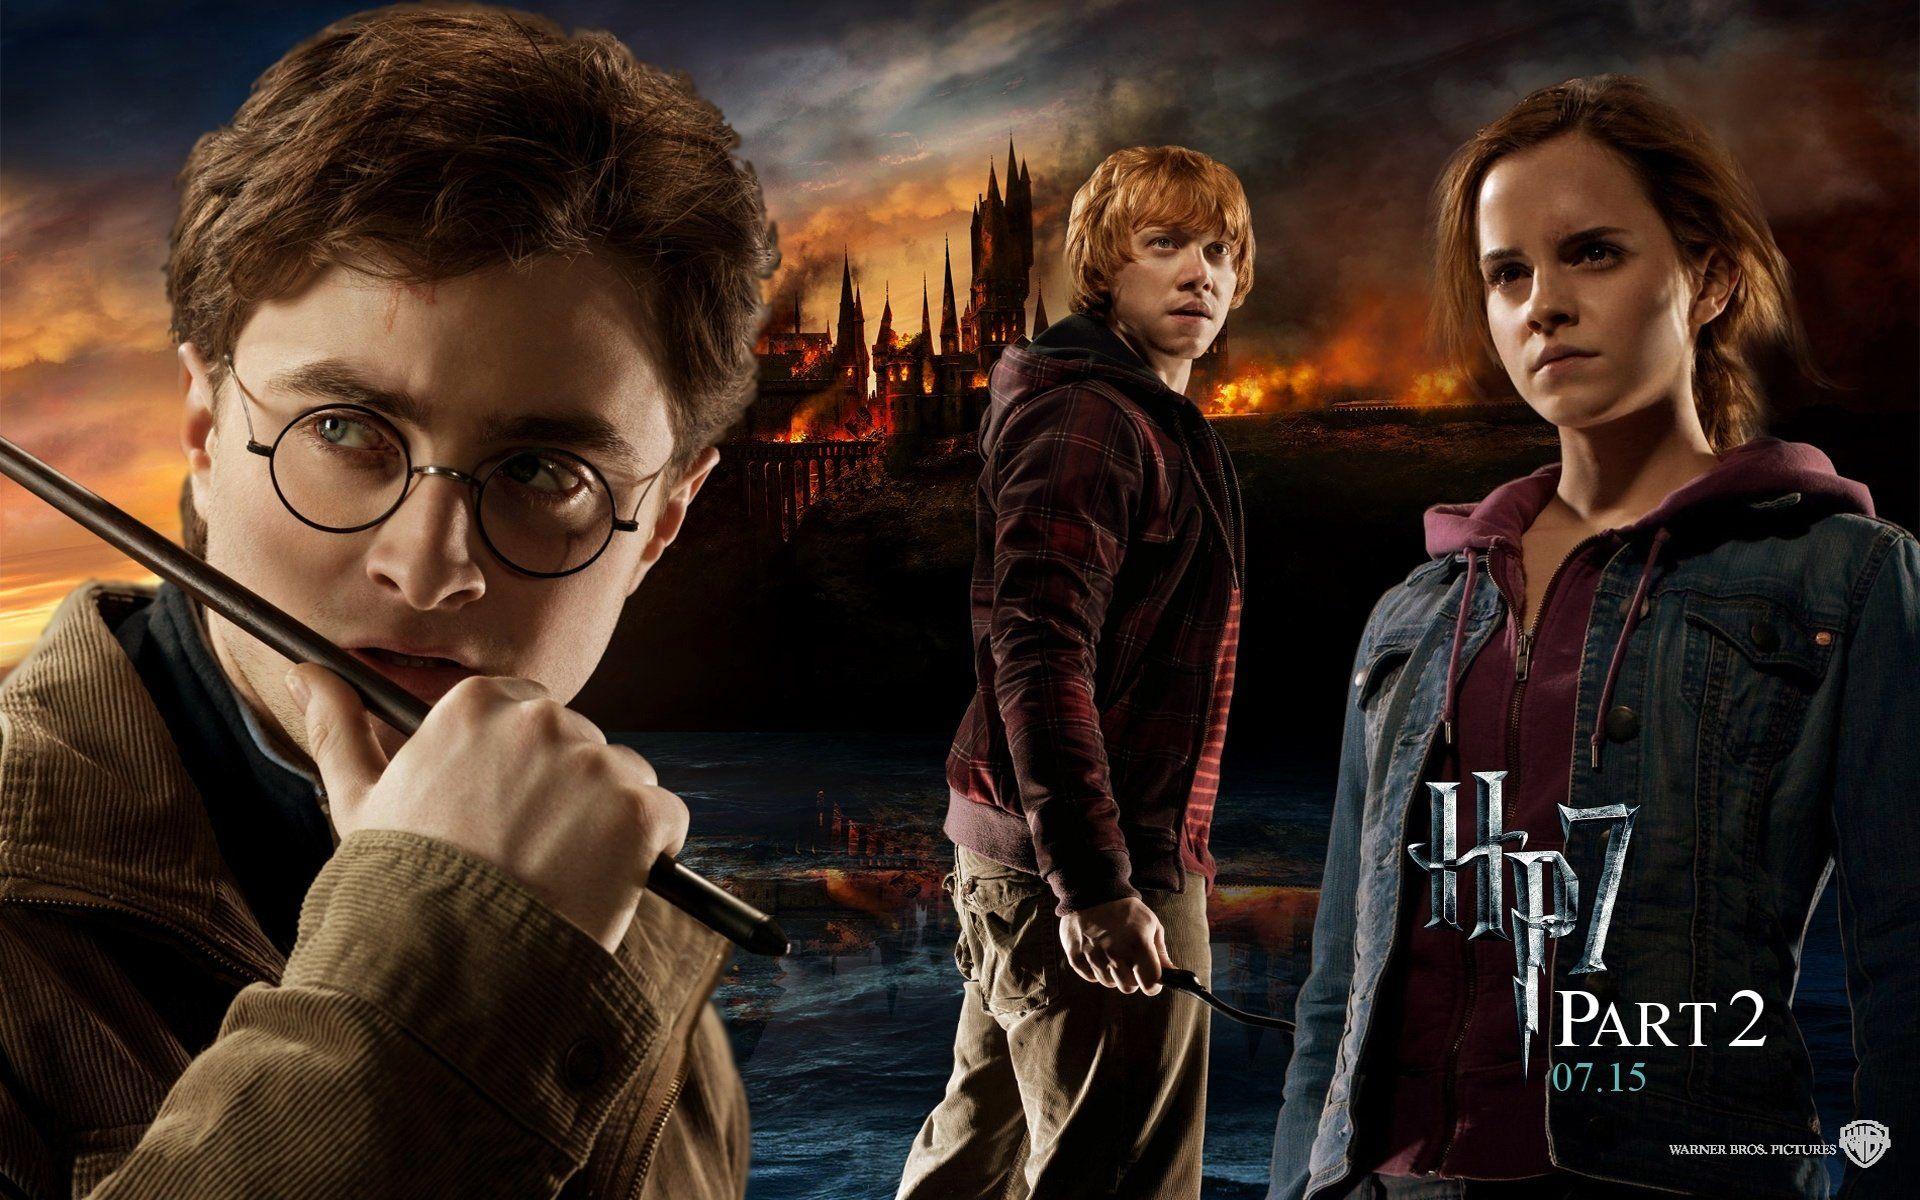 Harry Potter and the Deathly Hallows: Part 2 HD Wallpaper